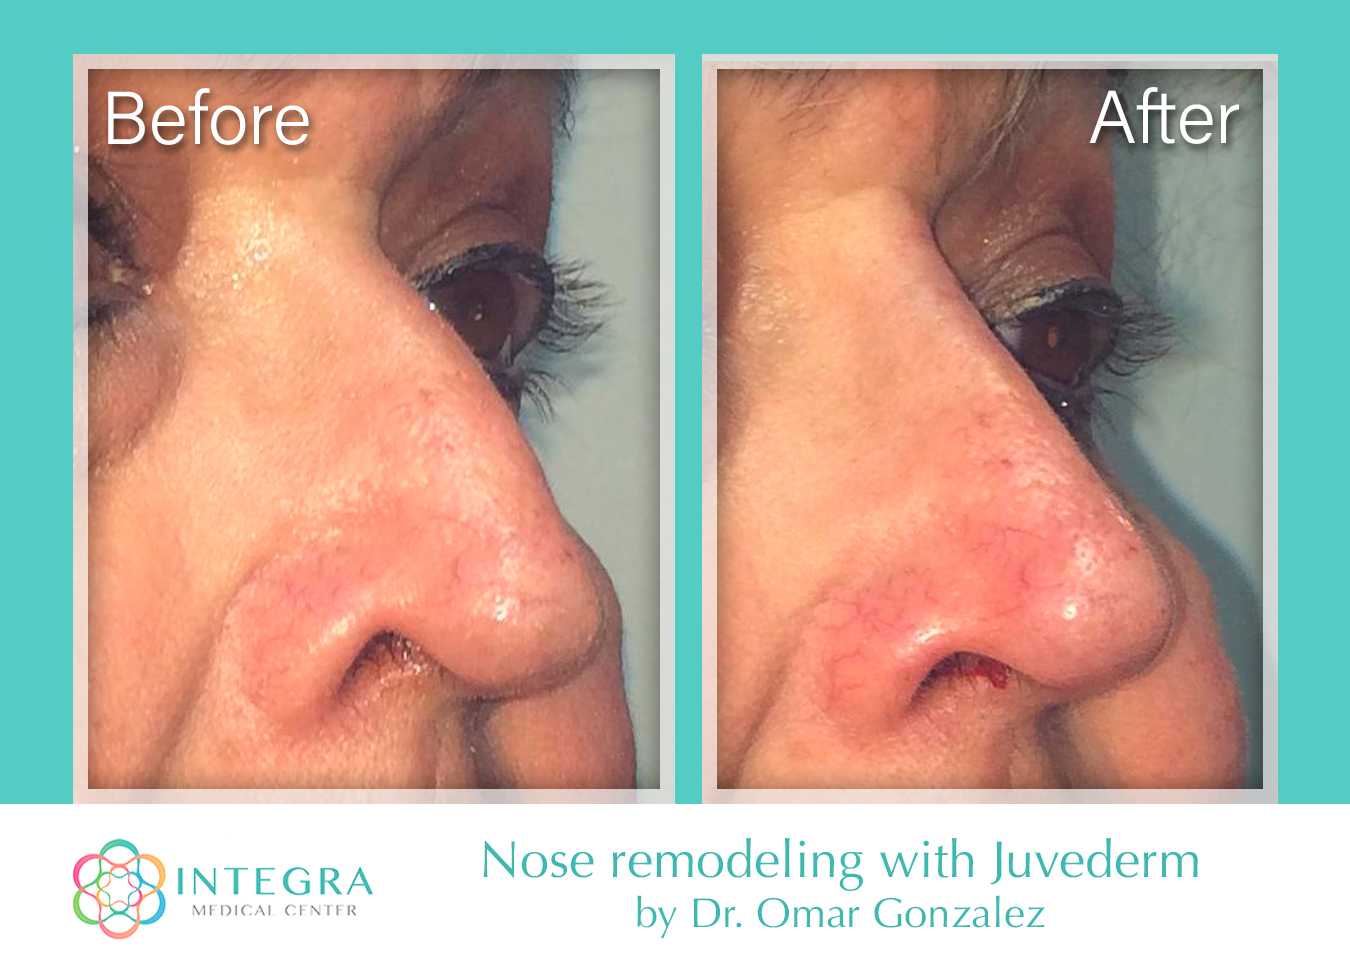 Before After - Nose remodeling with Juvederm. By Dr. Omar Gonzalez at Integra Medical Center in Nuevo Progreso, Mexico.